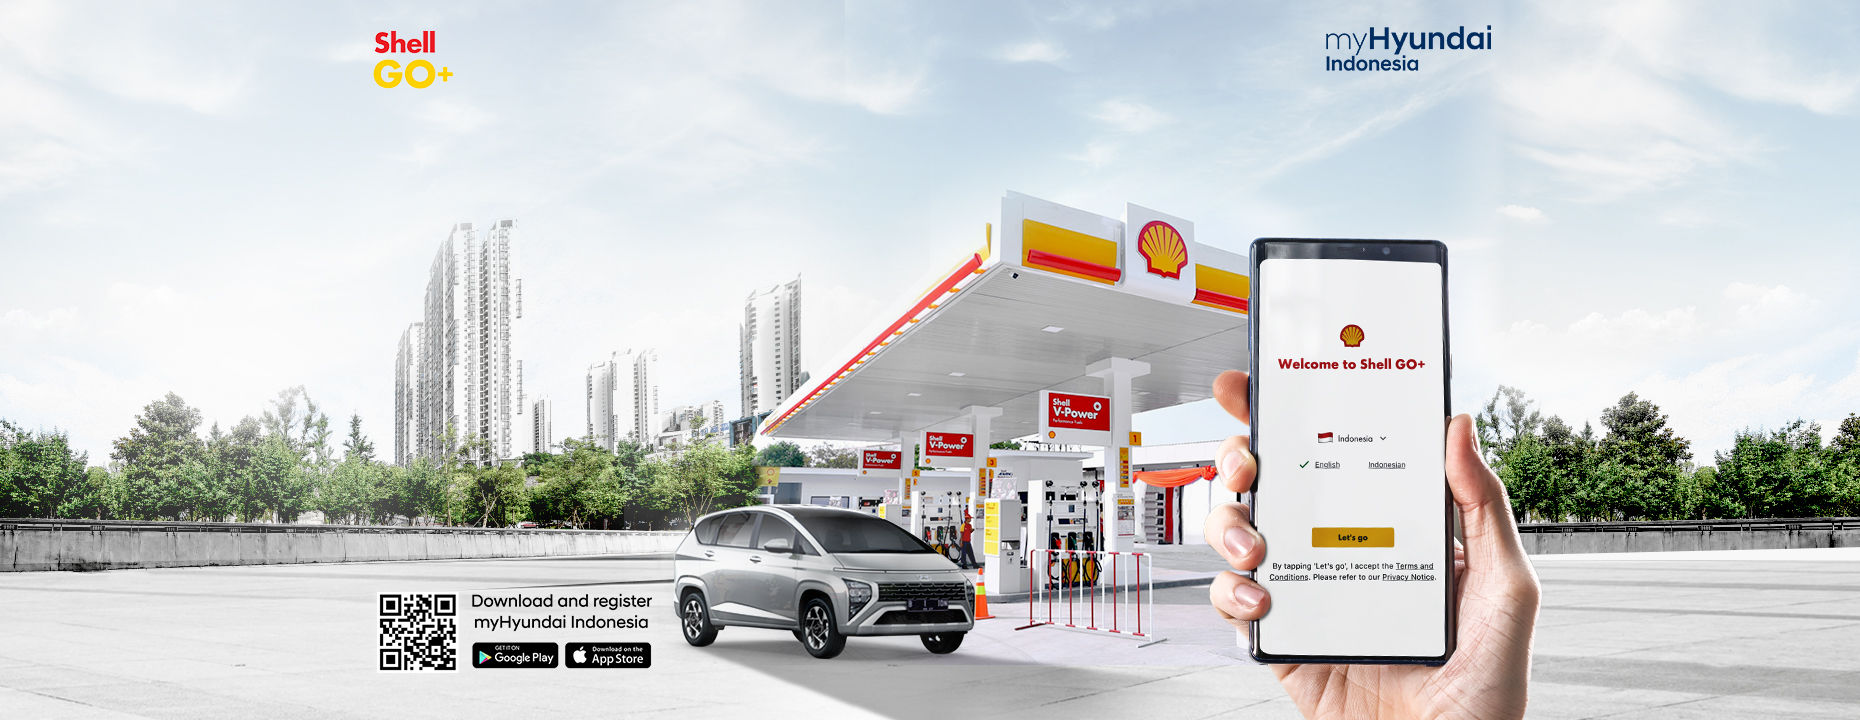 FREE* 150 points Shell GO+